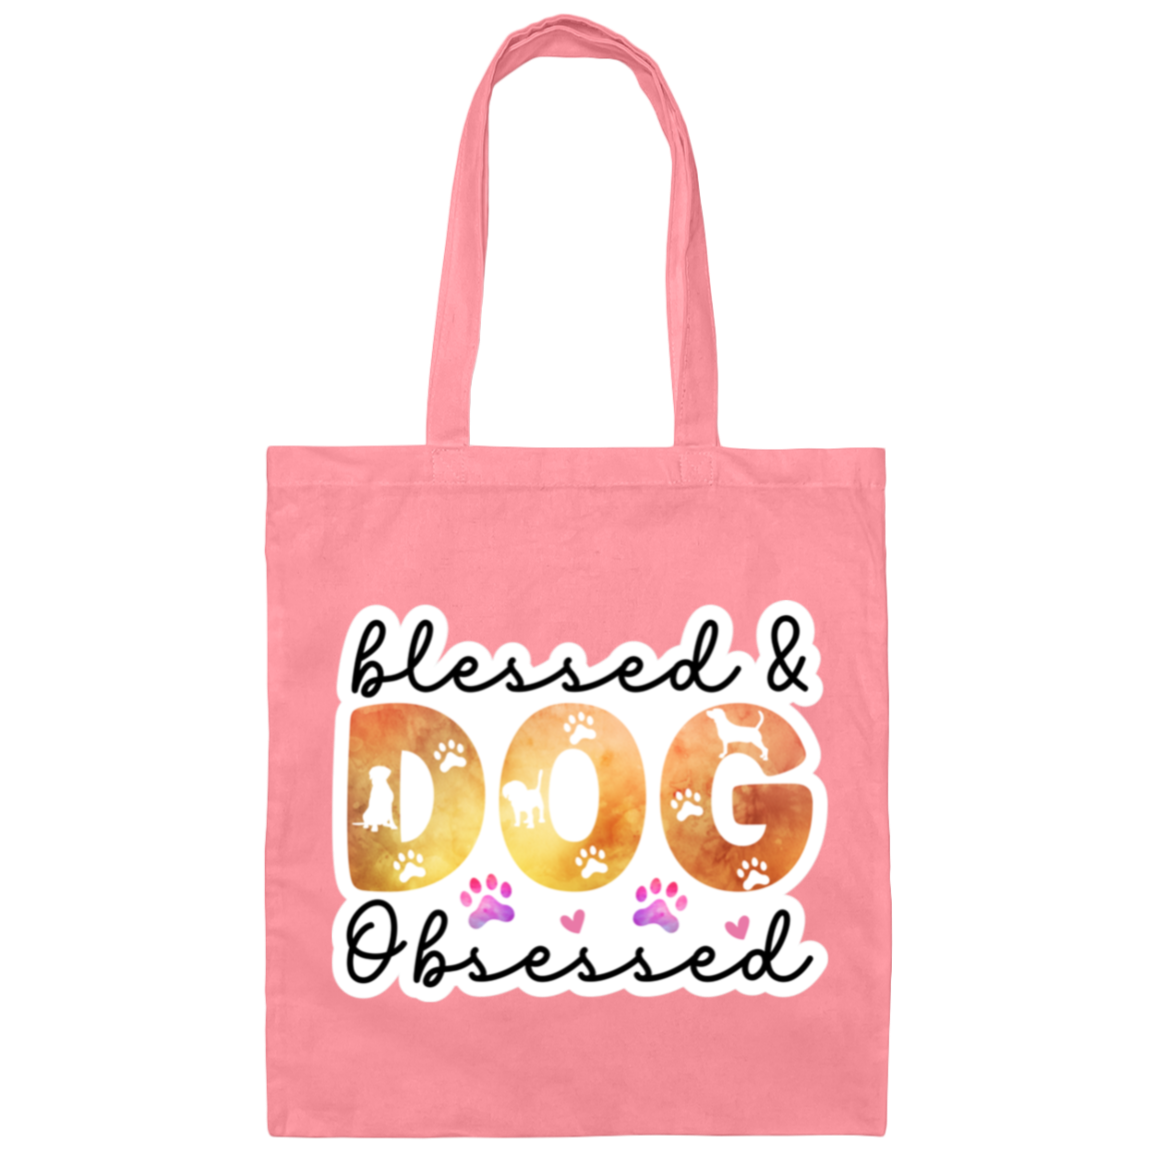 Blessed & Dog Obsessed Watercolor Canvas Tote Bag